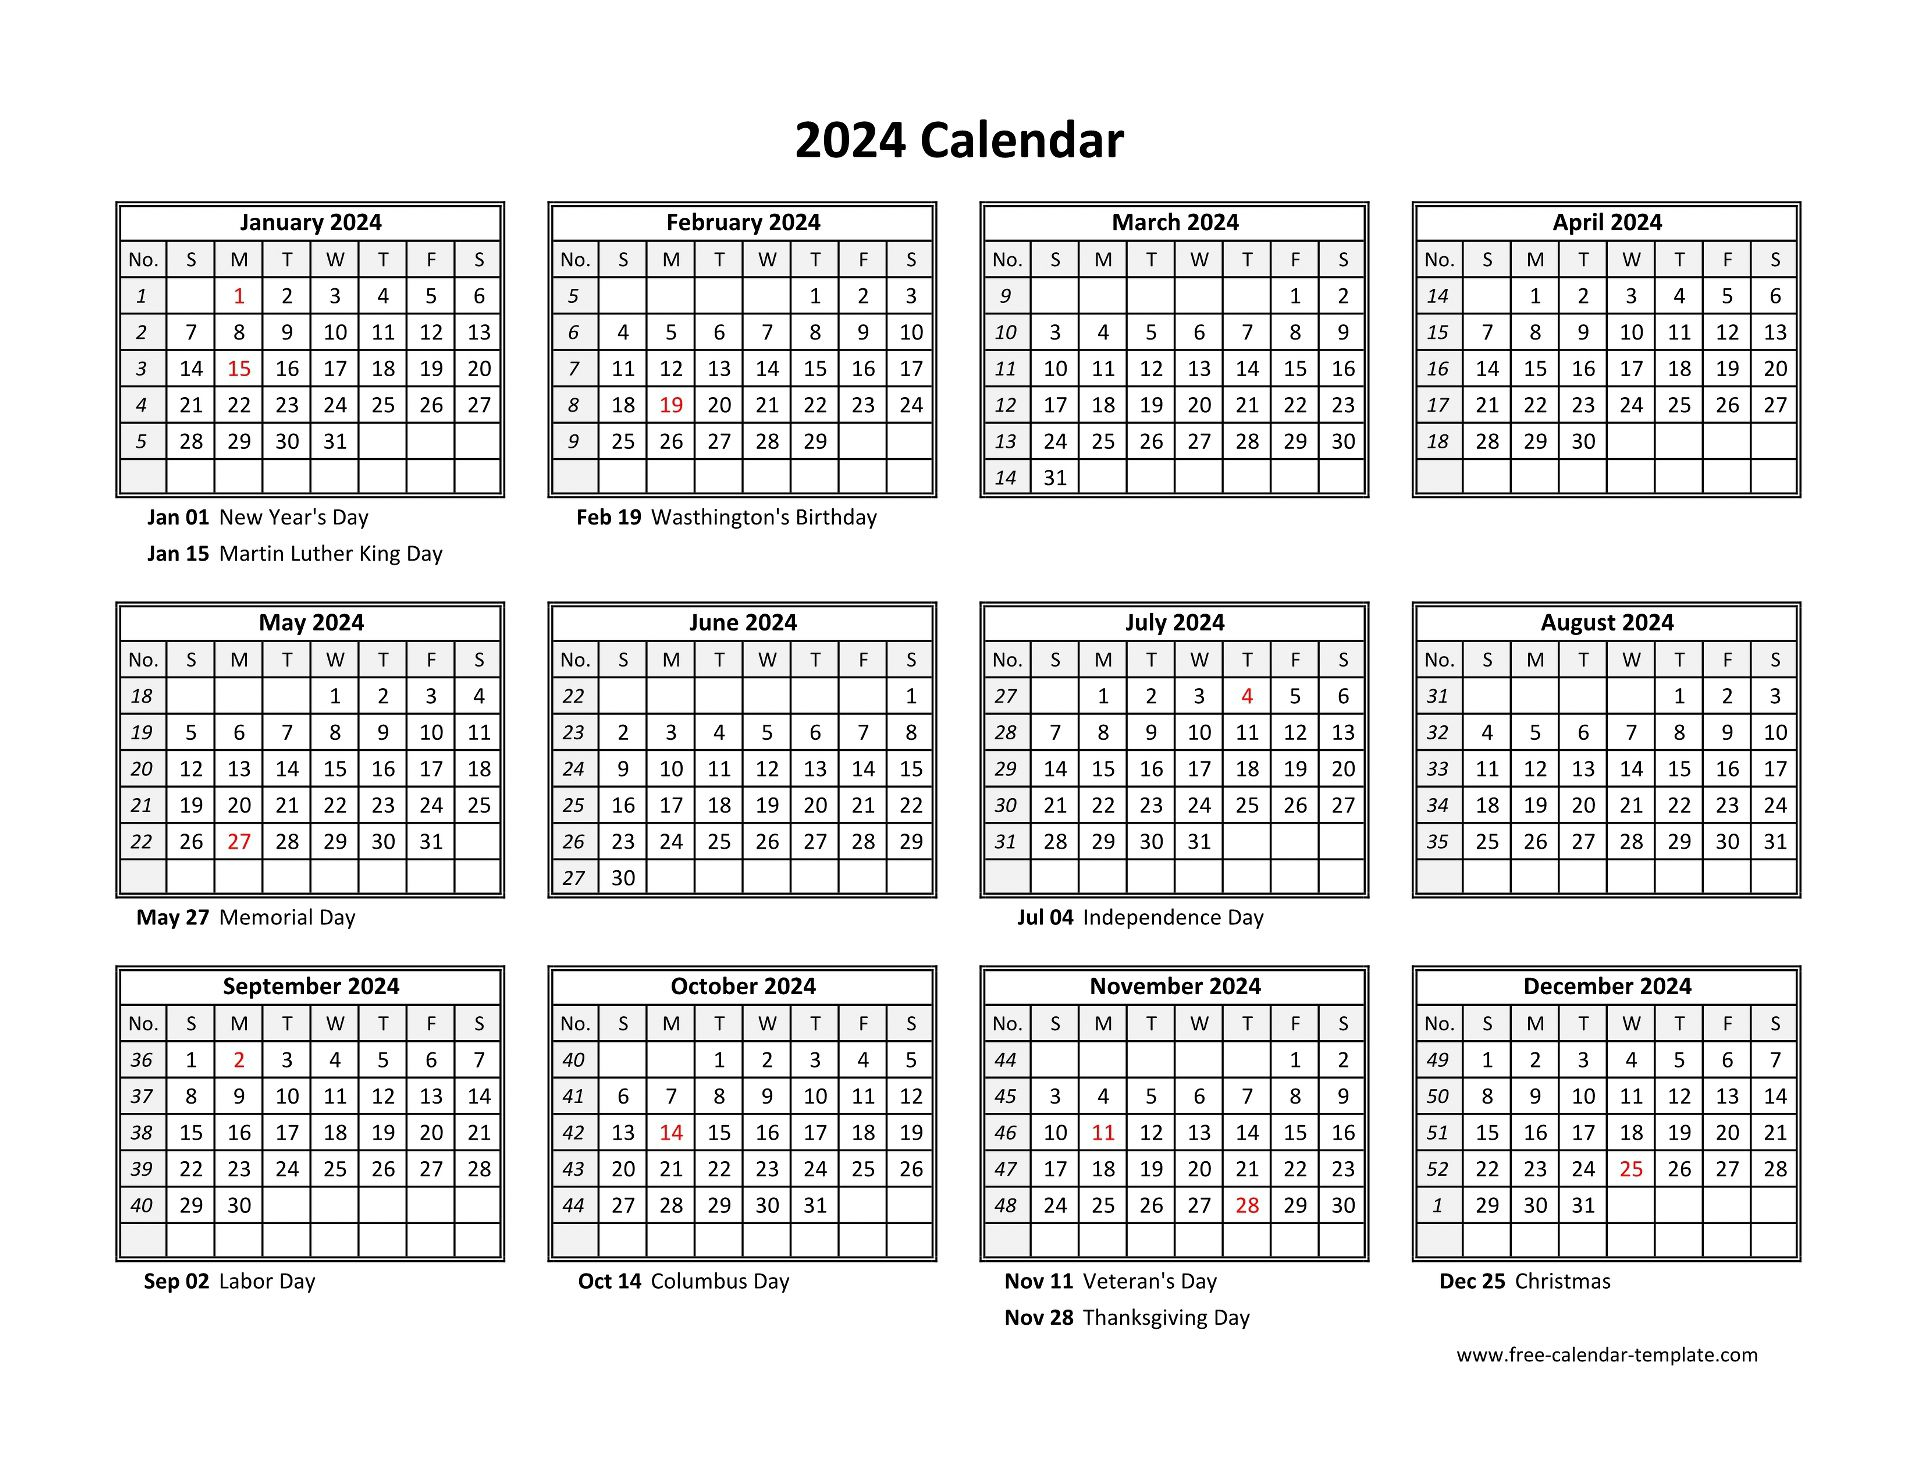 Printable Yearly Calendar 2024 | Free-Calendar-Template for Printable 2024 Calendar Pages